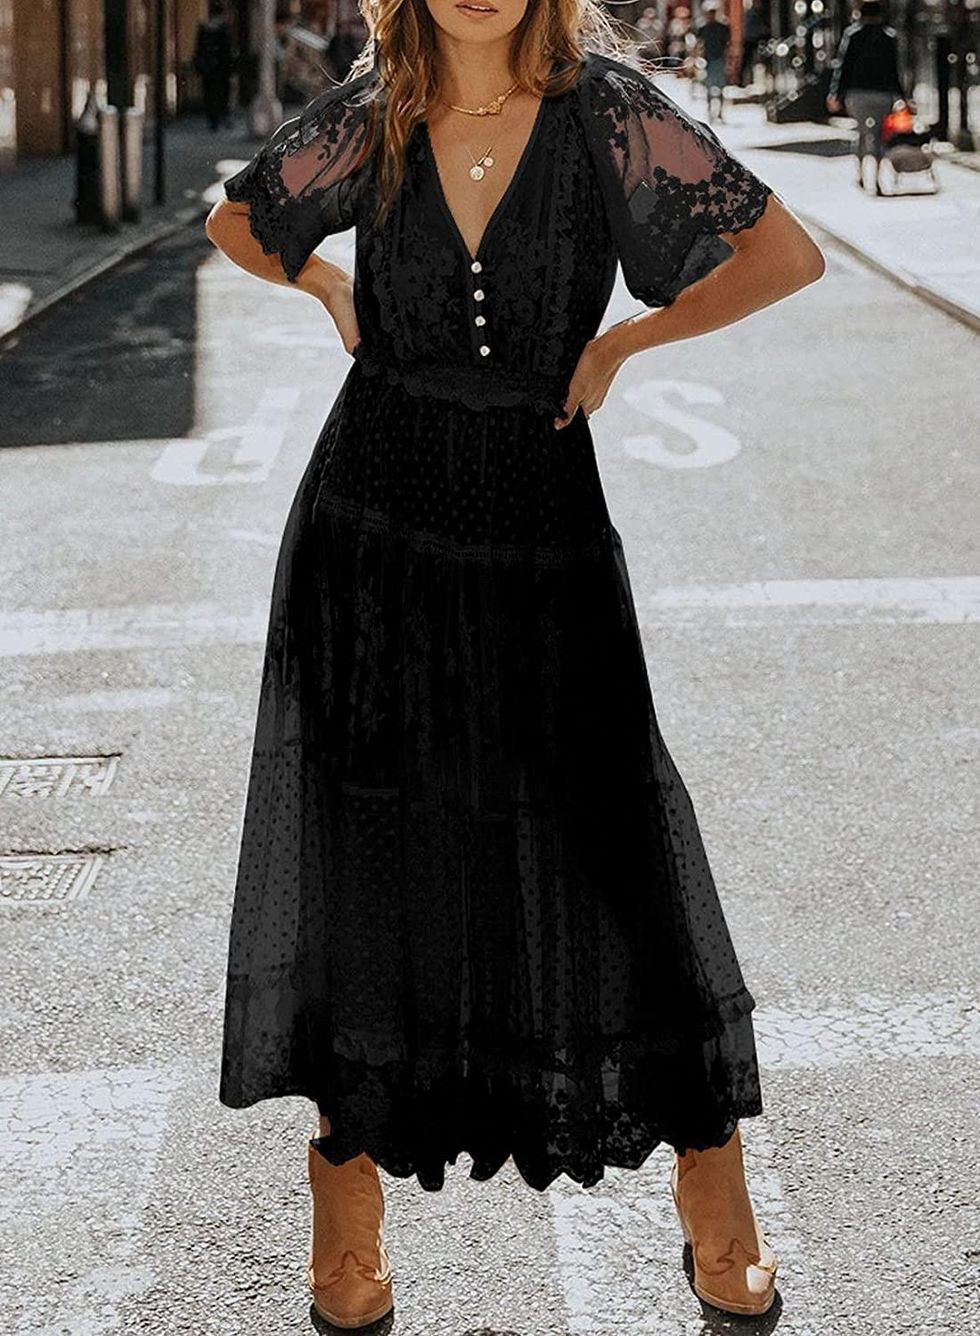 black lace maxi dress wednesday addams style outfit inspo